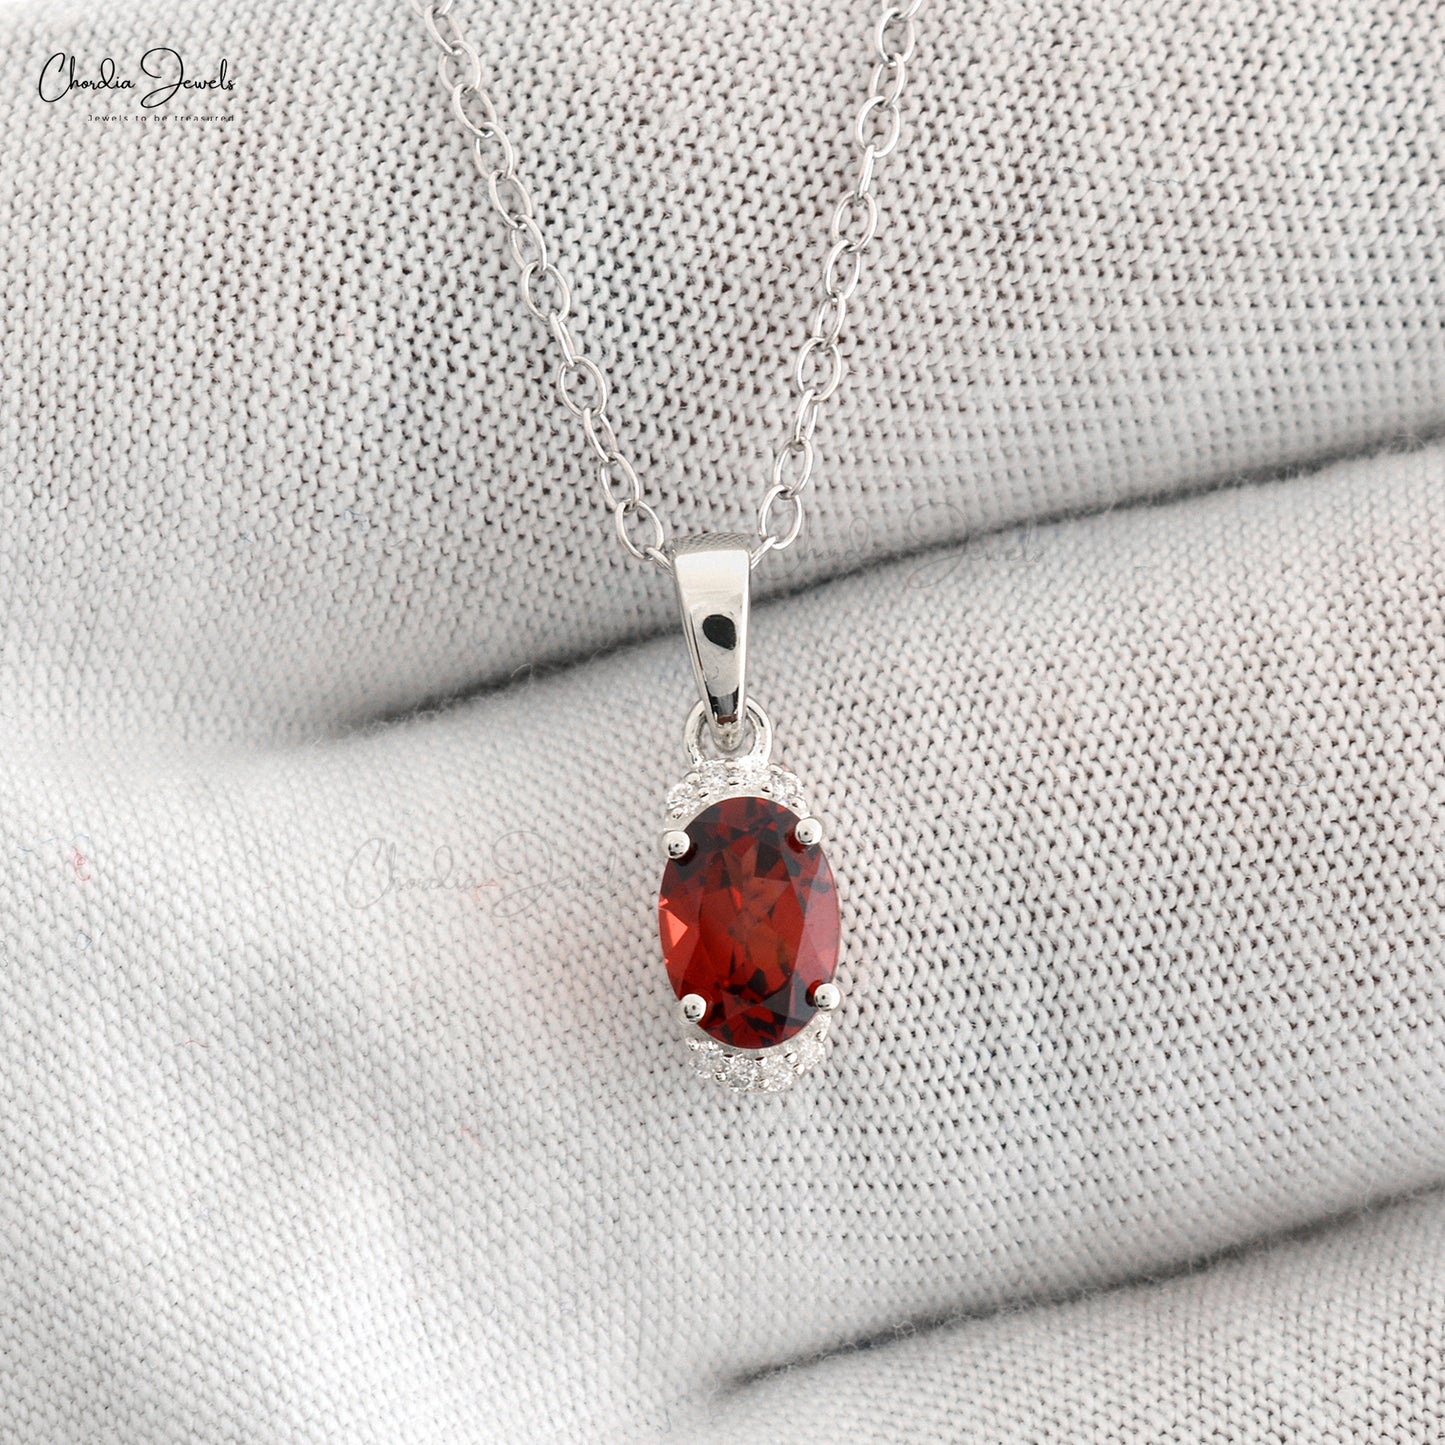 Sparkling Half Halo Diamond Pendant fits Necklace in 14k Real White Gold Genuine Garnet Gemstone Jewelry For Occasion Gift